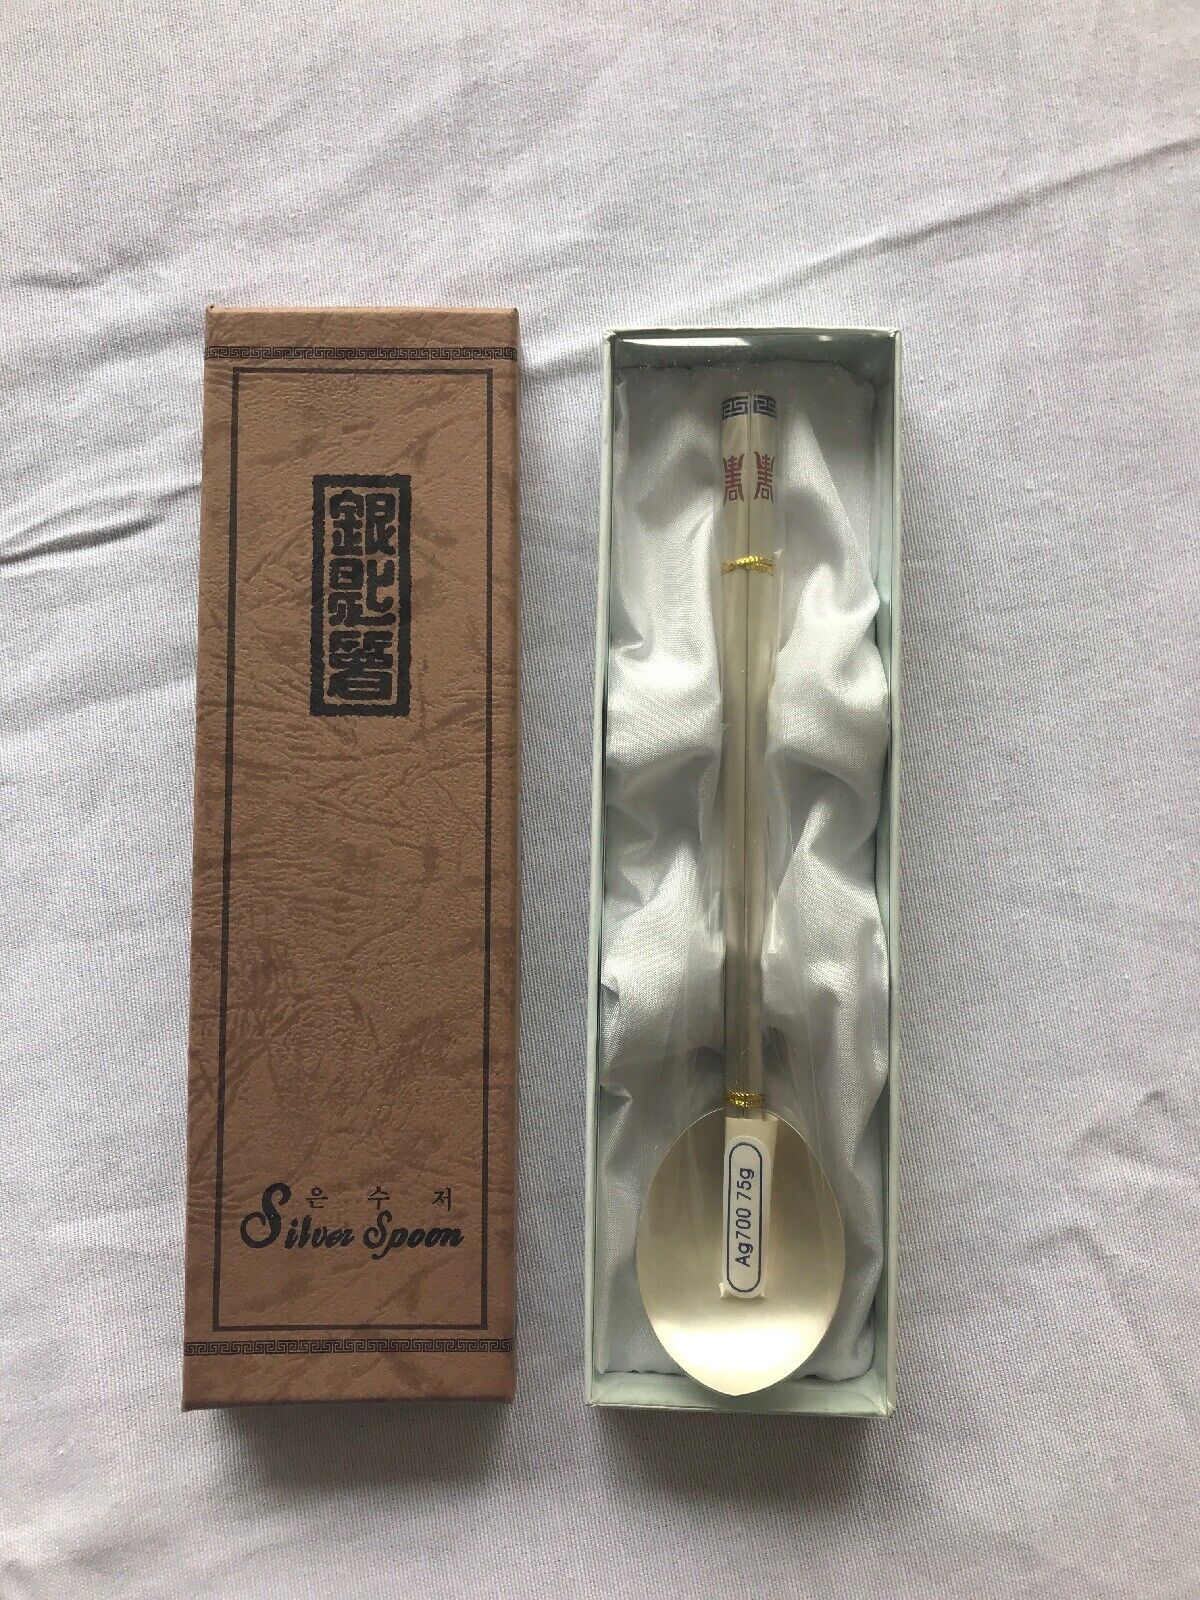 Silver Spoon Chopstick Combo Ag 700 75g Vintage New In Box.